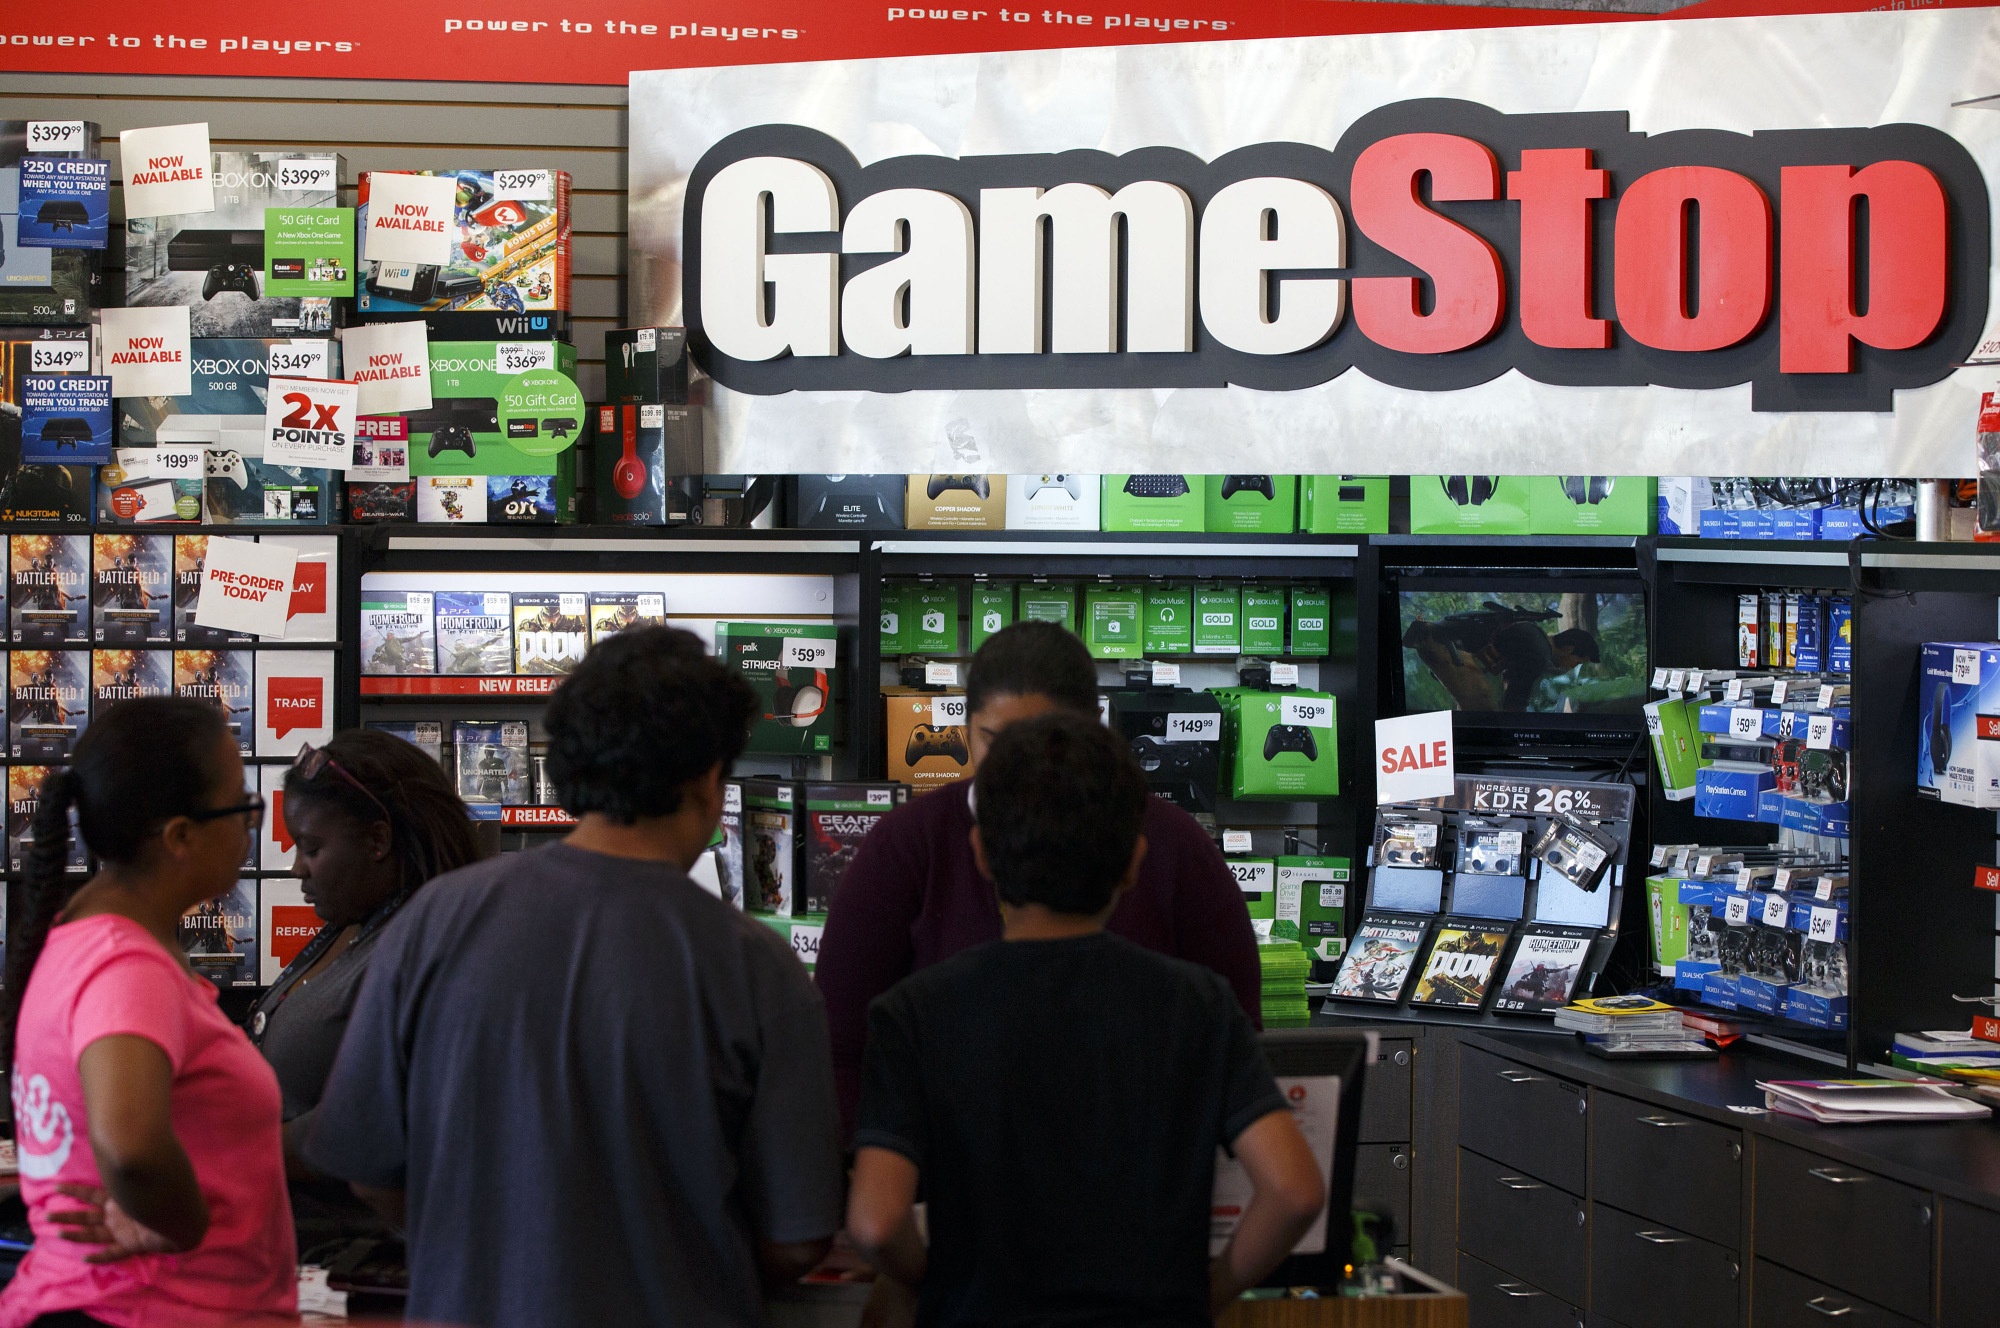 Customers buy from a GameStop store.